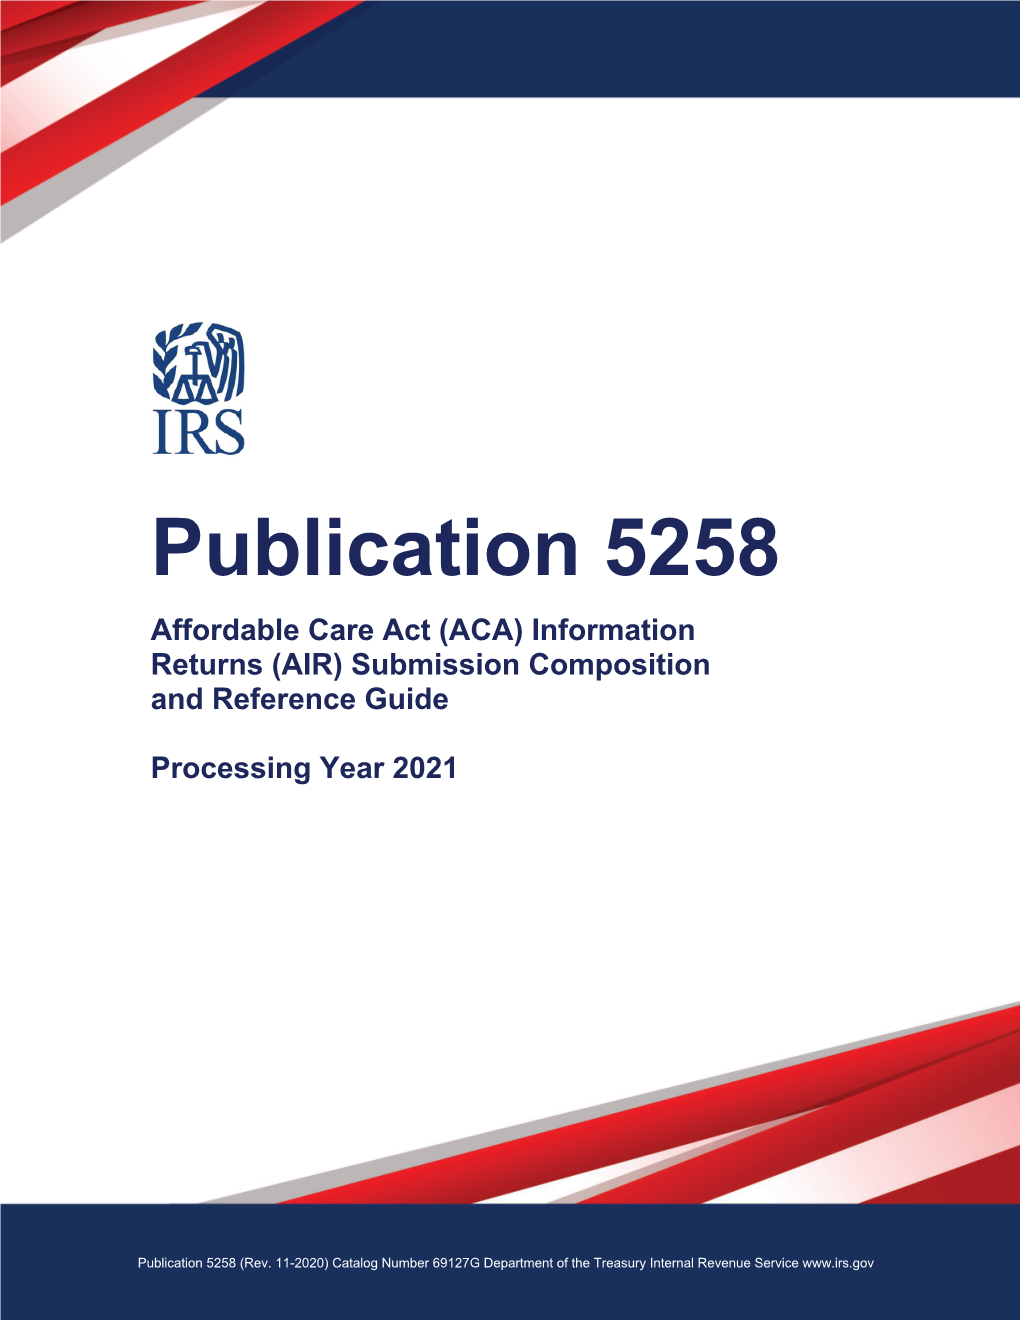 Publication 5258, Affordable Care Act (ACA) Information Returns (AIR)